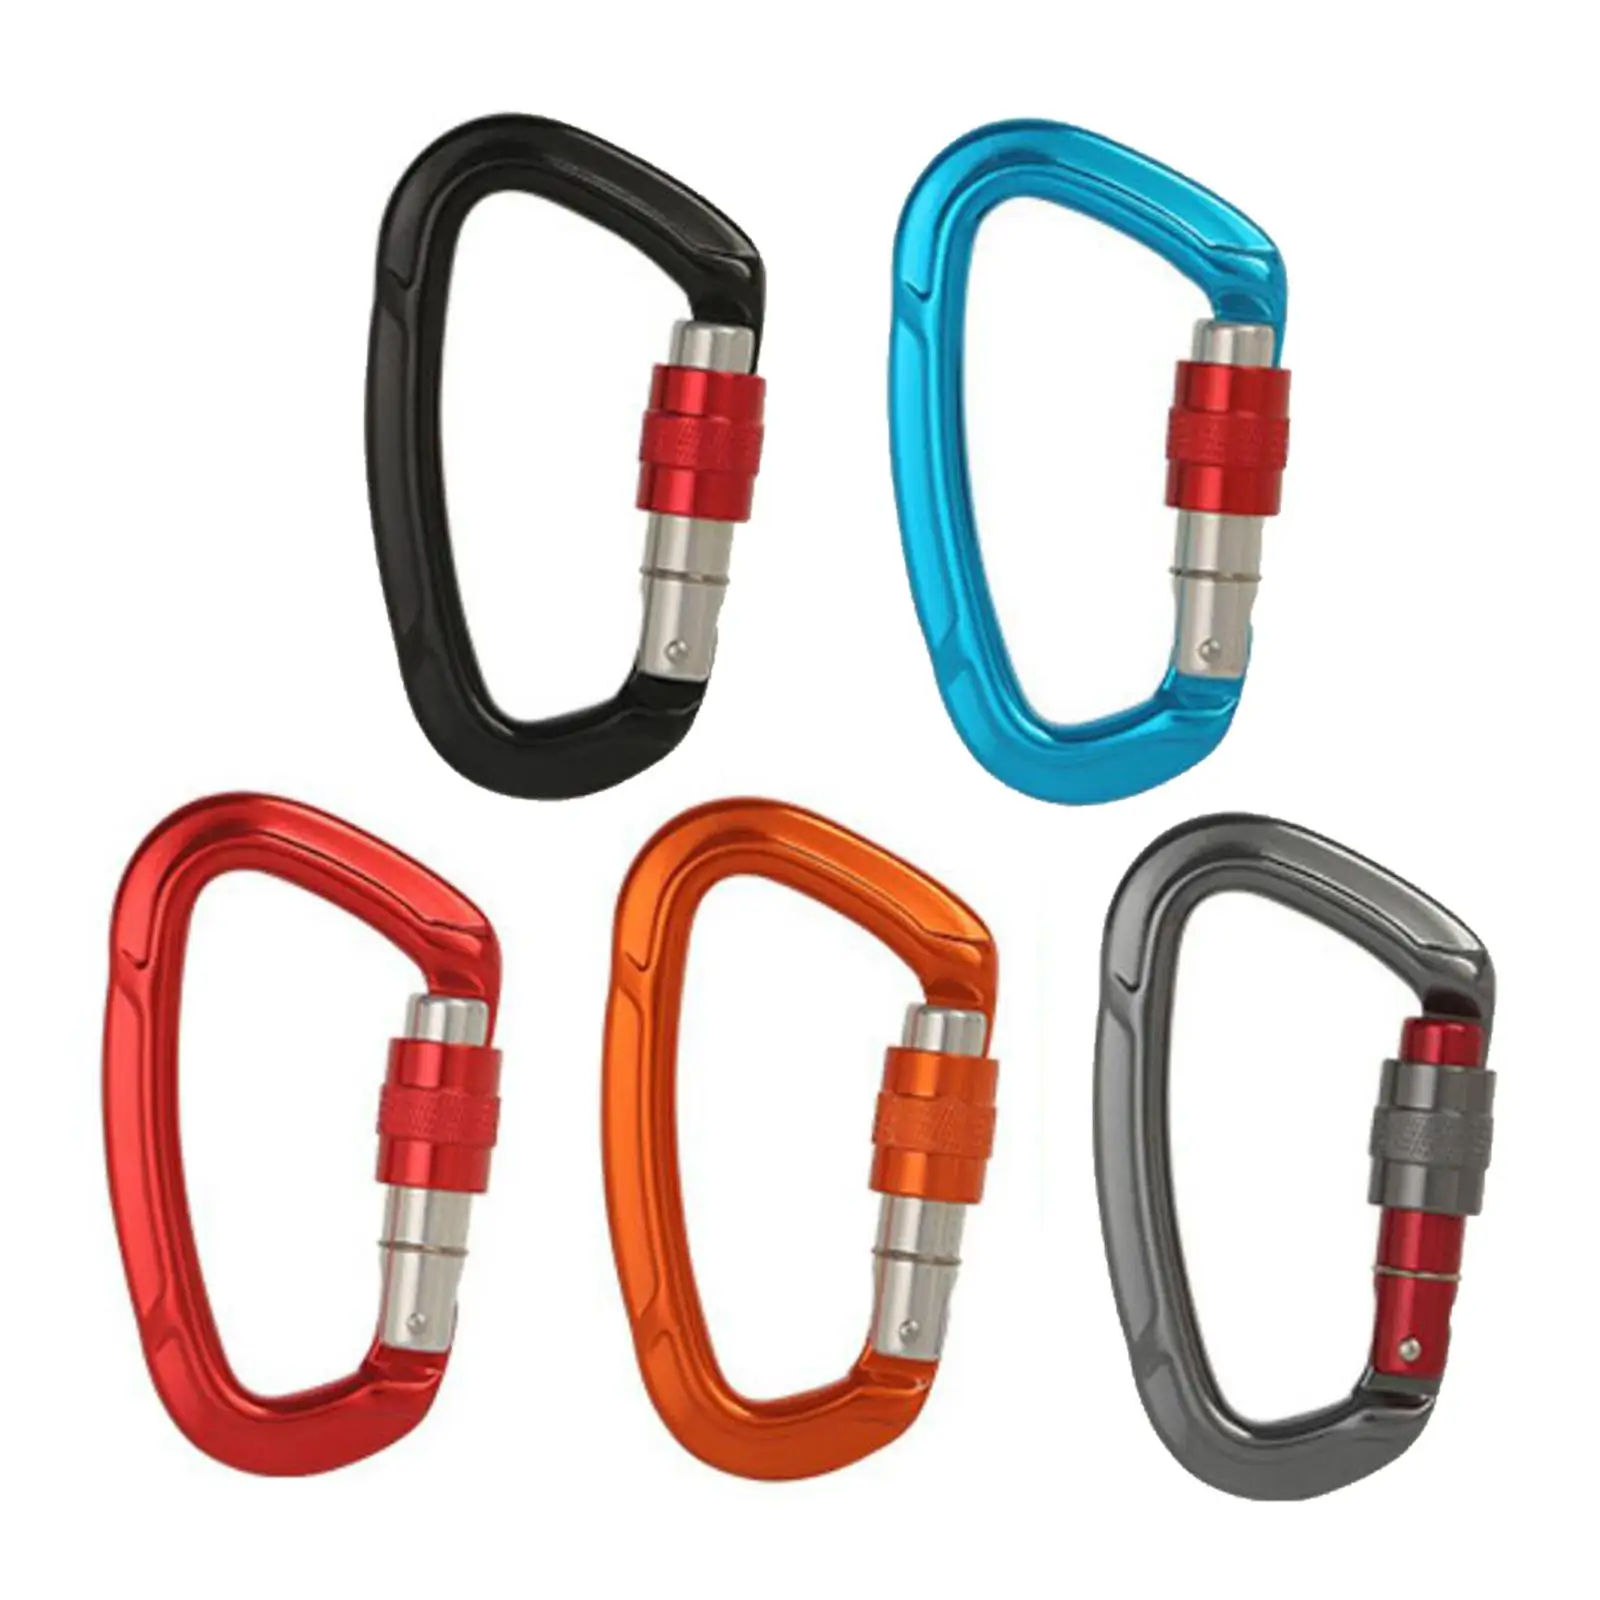 25KN Climbing Carabiner Screwgate Carabiners Rescuing Safety Gear 